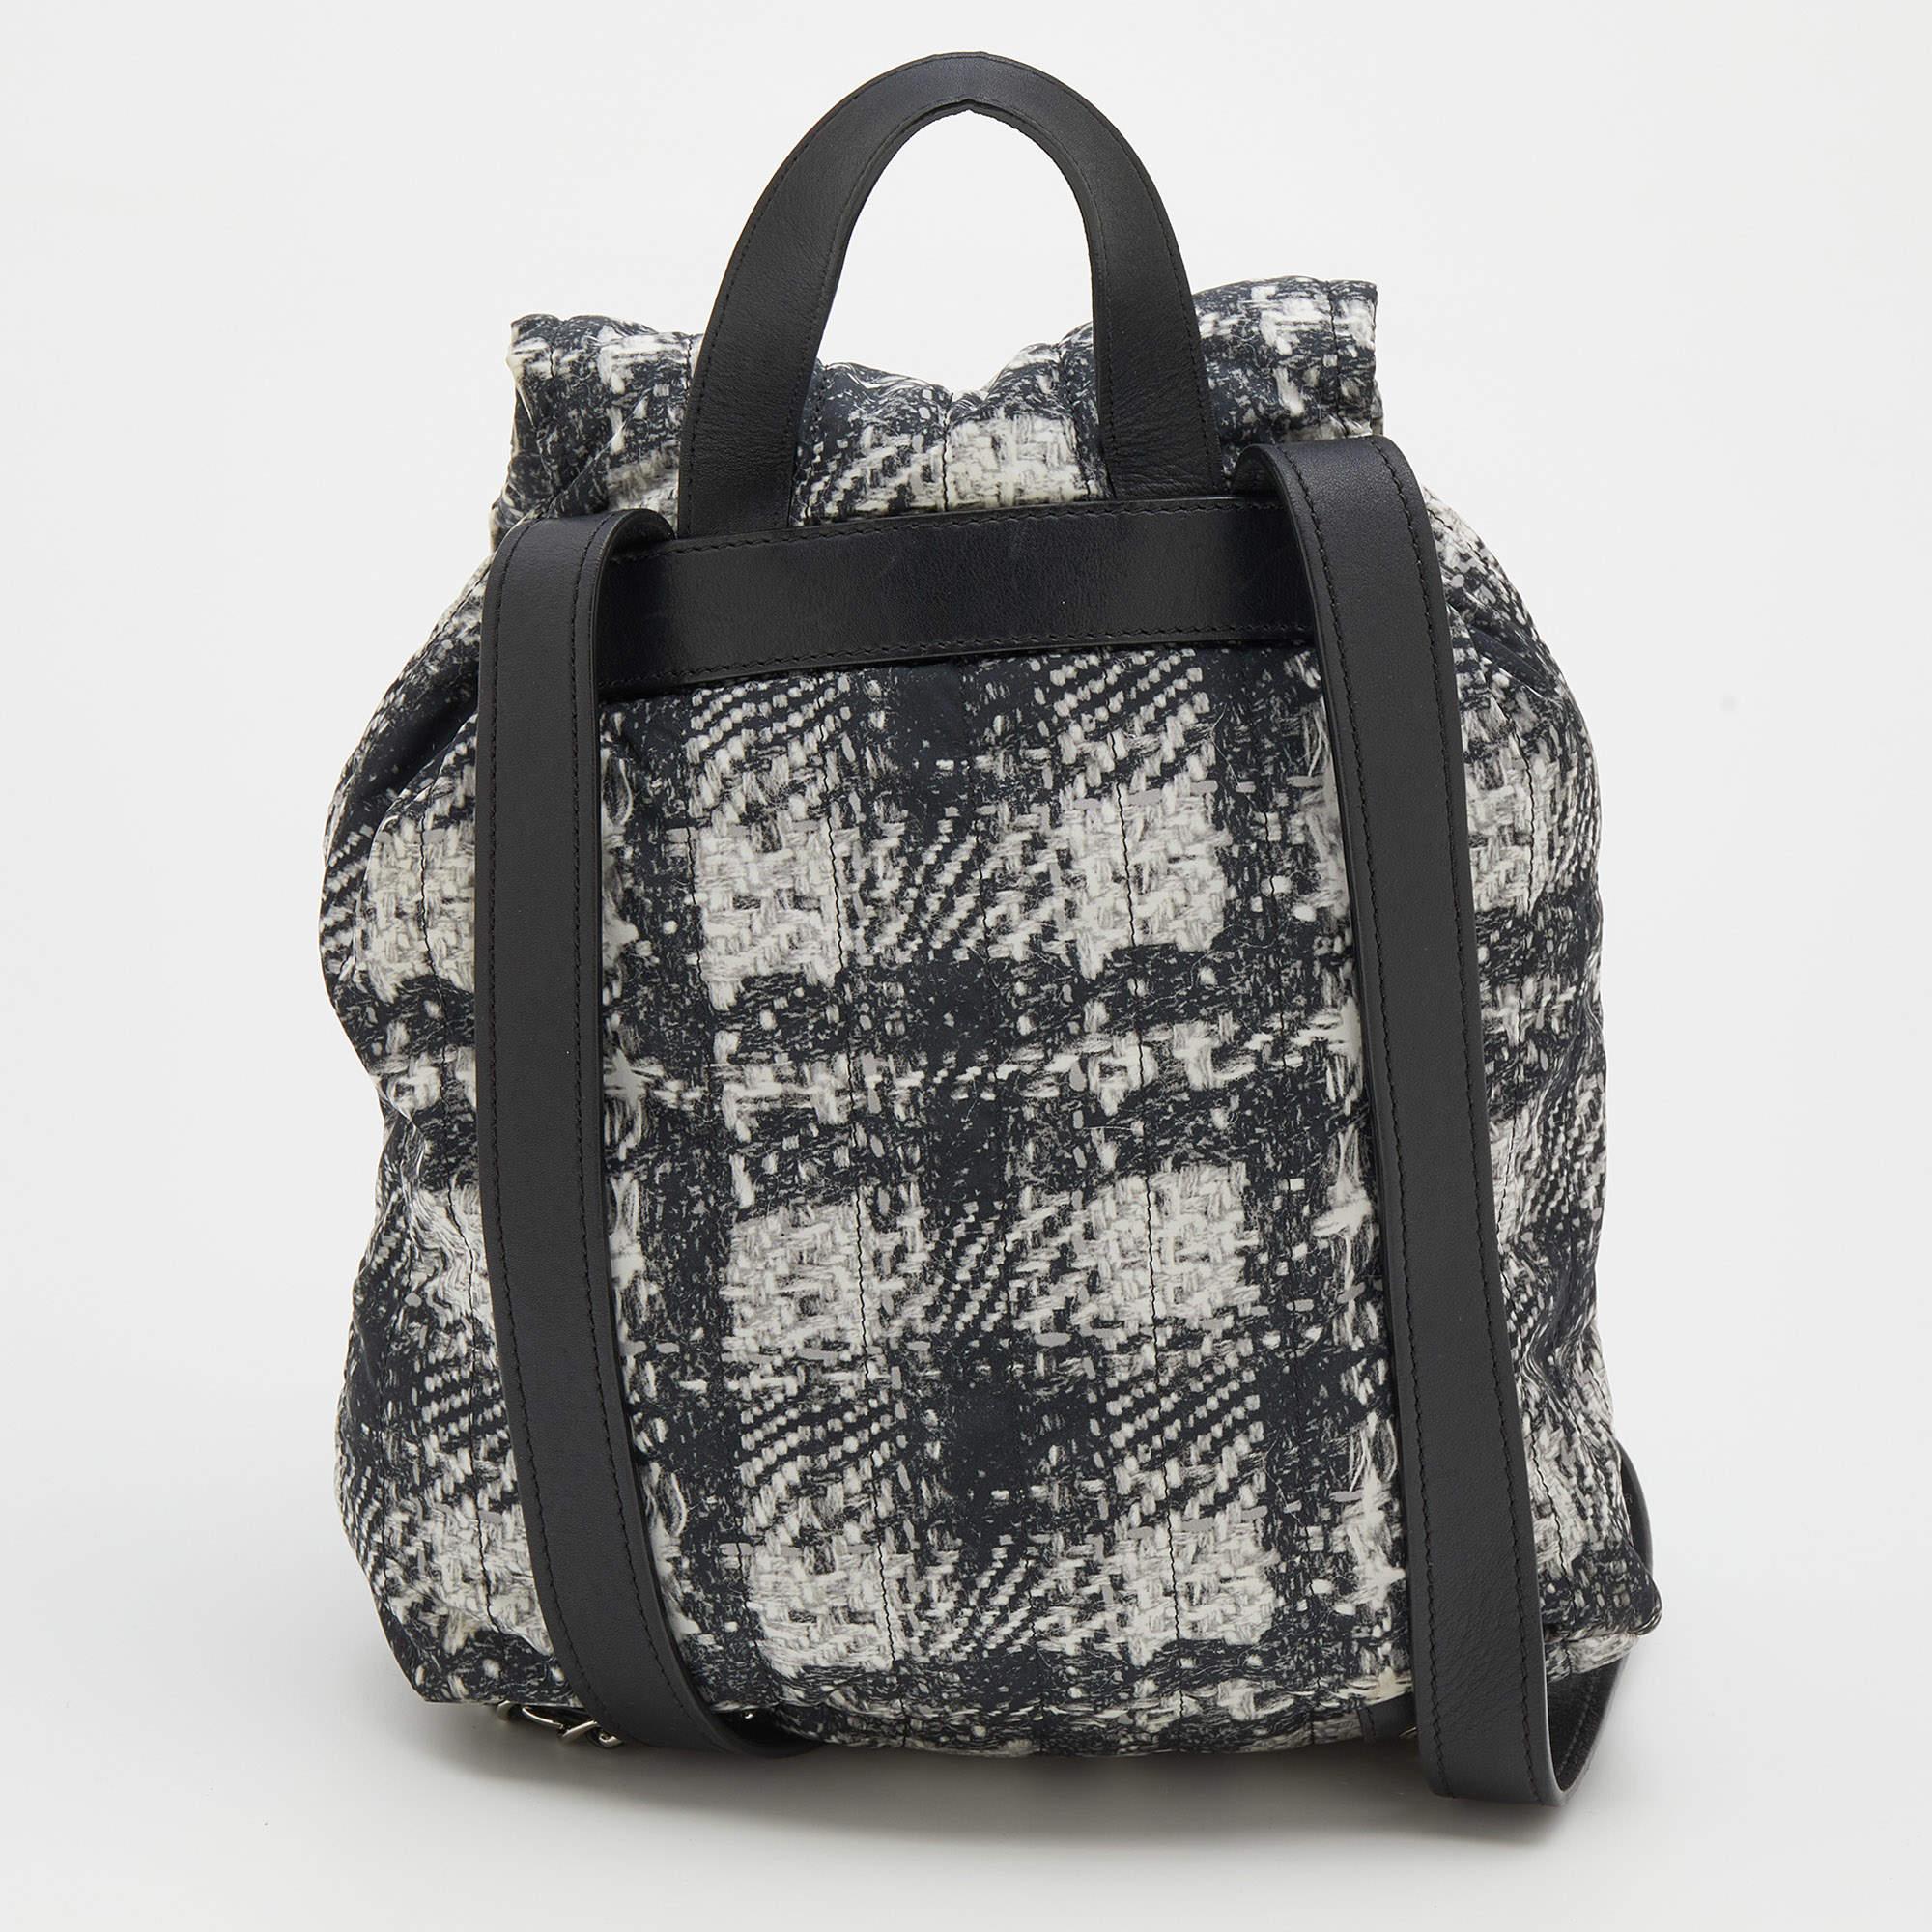 The drawstring enhances the silhouette of this Chanel backpack. Crafted from tweed-printed nylon, it signifies luxury and fashion. The 'CC' motif on the front adds a signature accent to it, and its exterior is equipped with a front zipper pocket. To